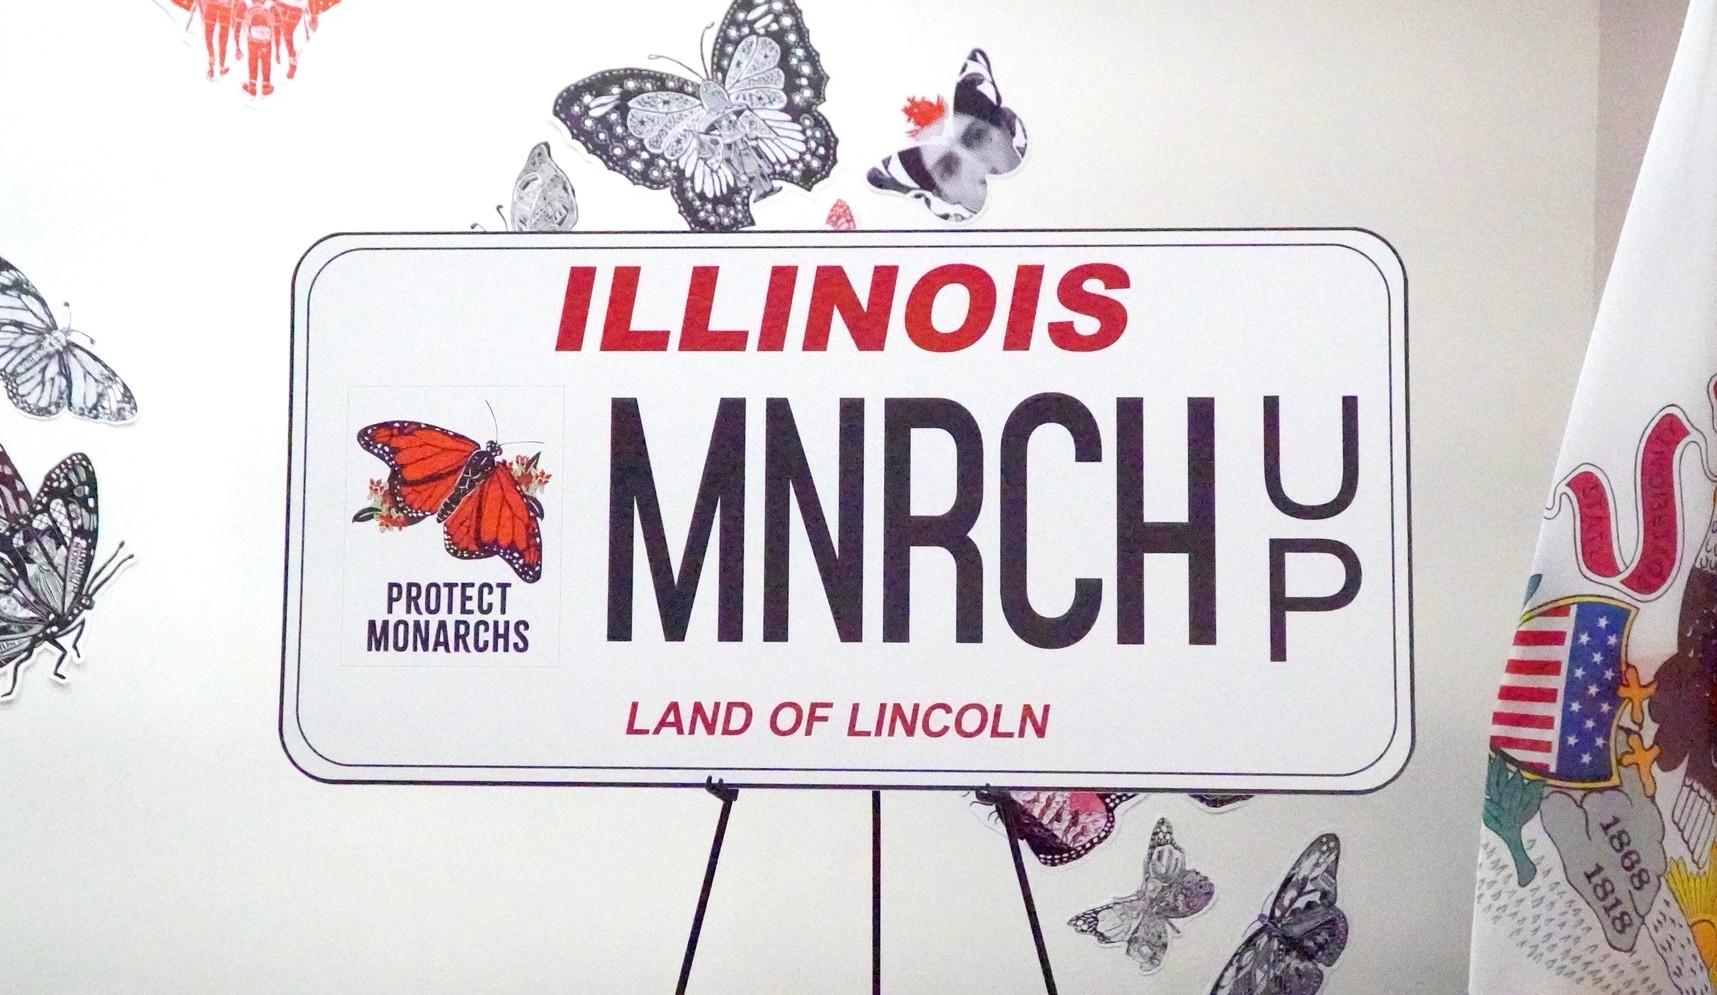 Illinois’ new universal specialty license plate design, with monarch butterfly decal. (Illinois Secretary of State / Facebook)